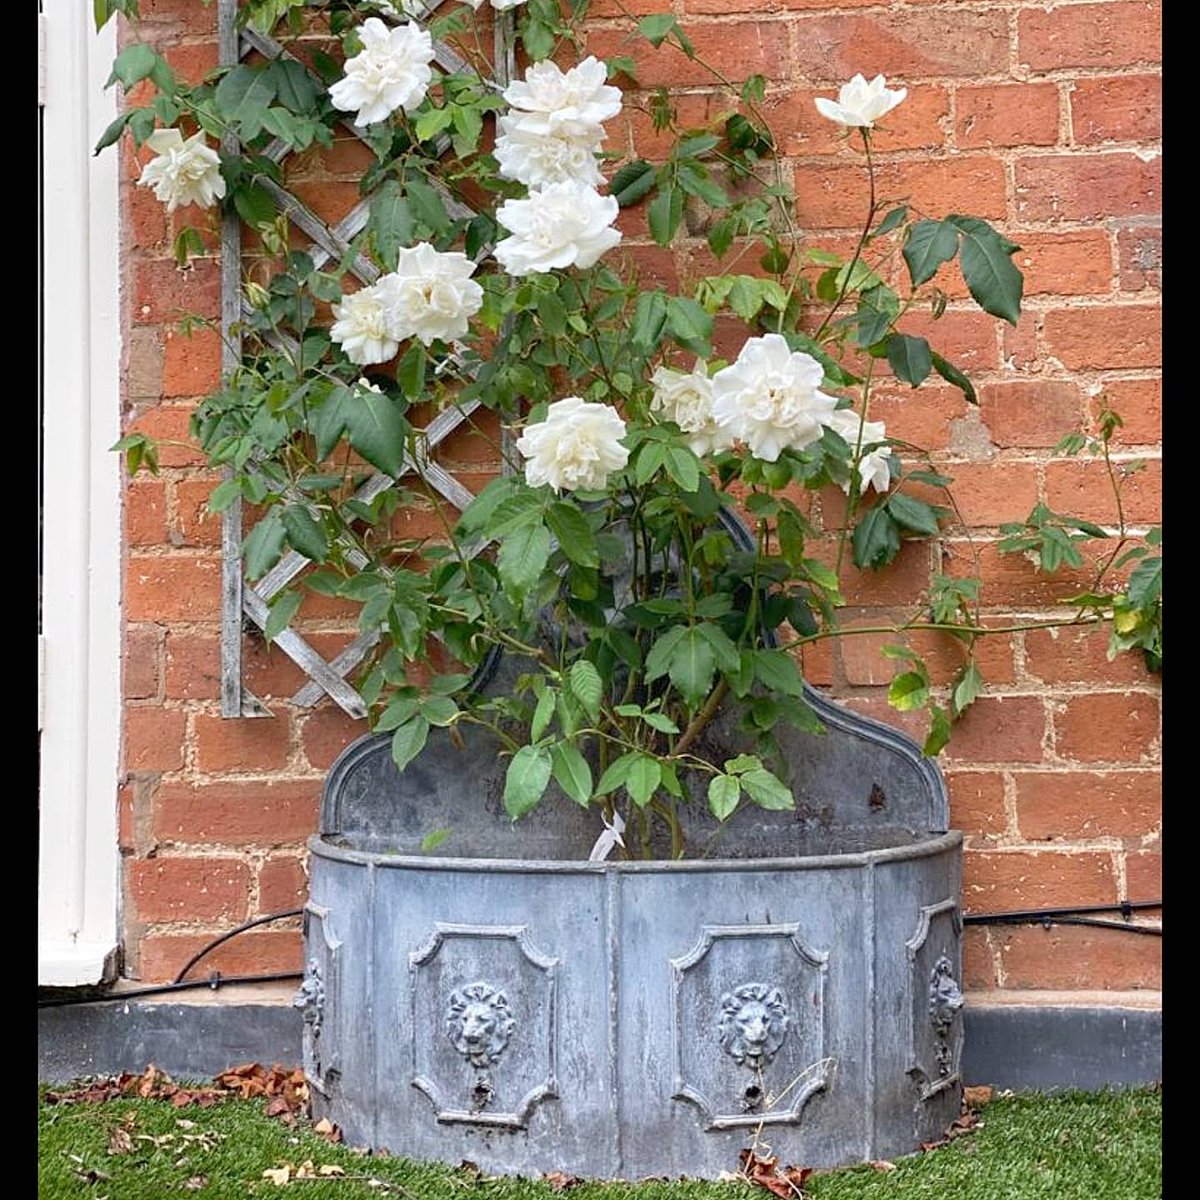 A very happy Rosa 'Madame Alfred Carrière' climbing #rose, planted on a south facing wall it has grown from a 2ft potted plant to an 8ft in just thirteen months! Even the 2nd #ClimbingRose planted in a lead planter on a North facing wall has grown to 4ft😊
#madamealfredcarriere